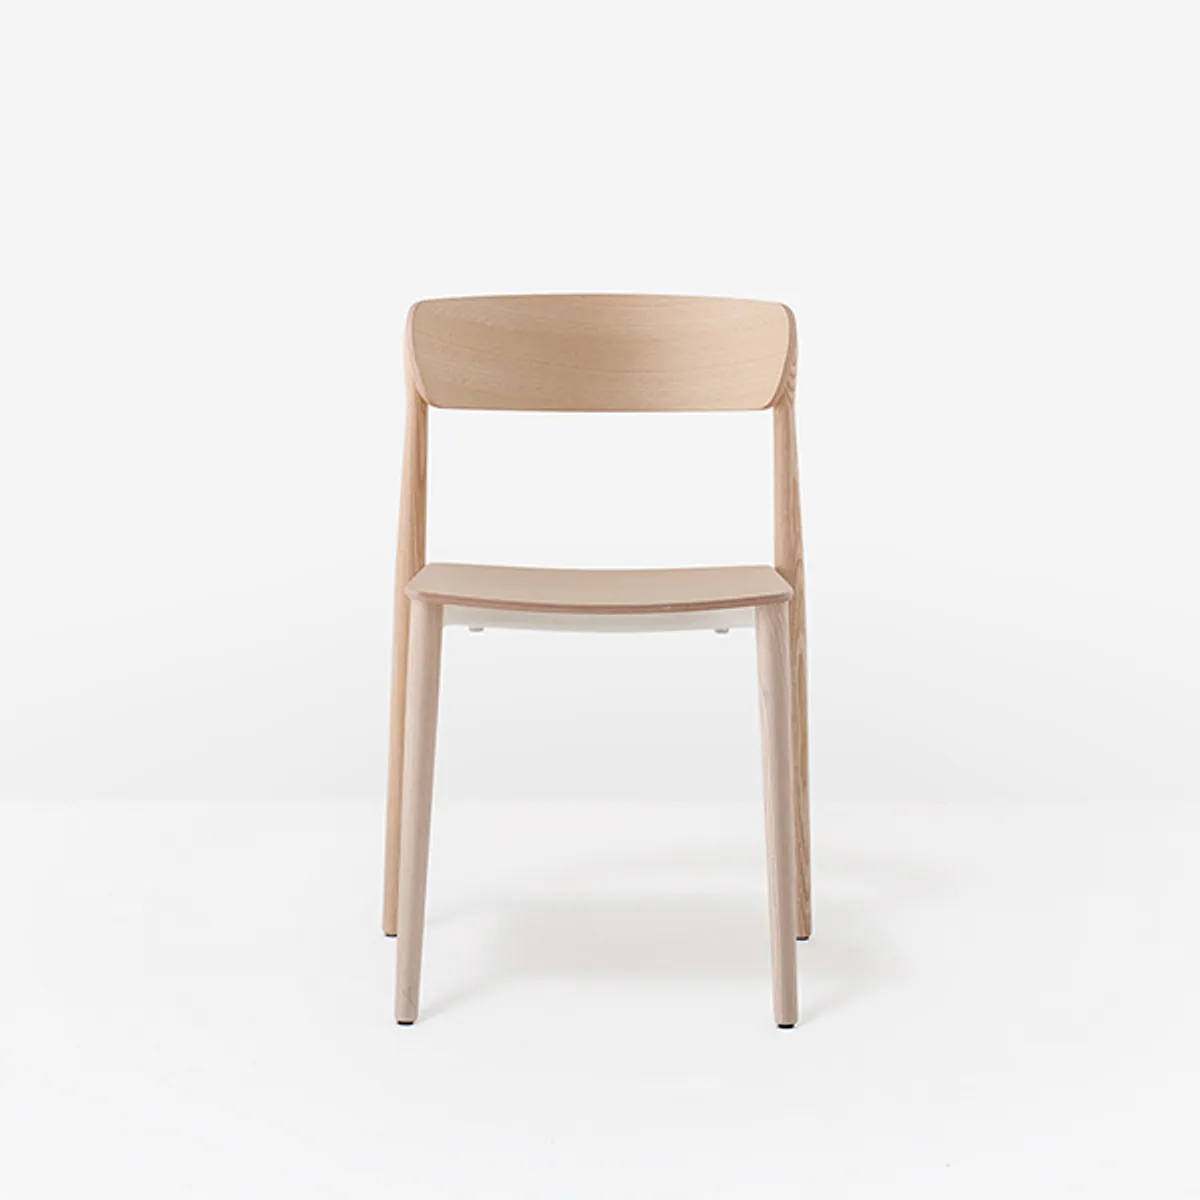 Nemea Chair 2820 Ashwood 02 Inside Out Contracts